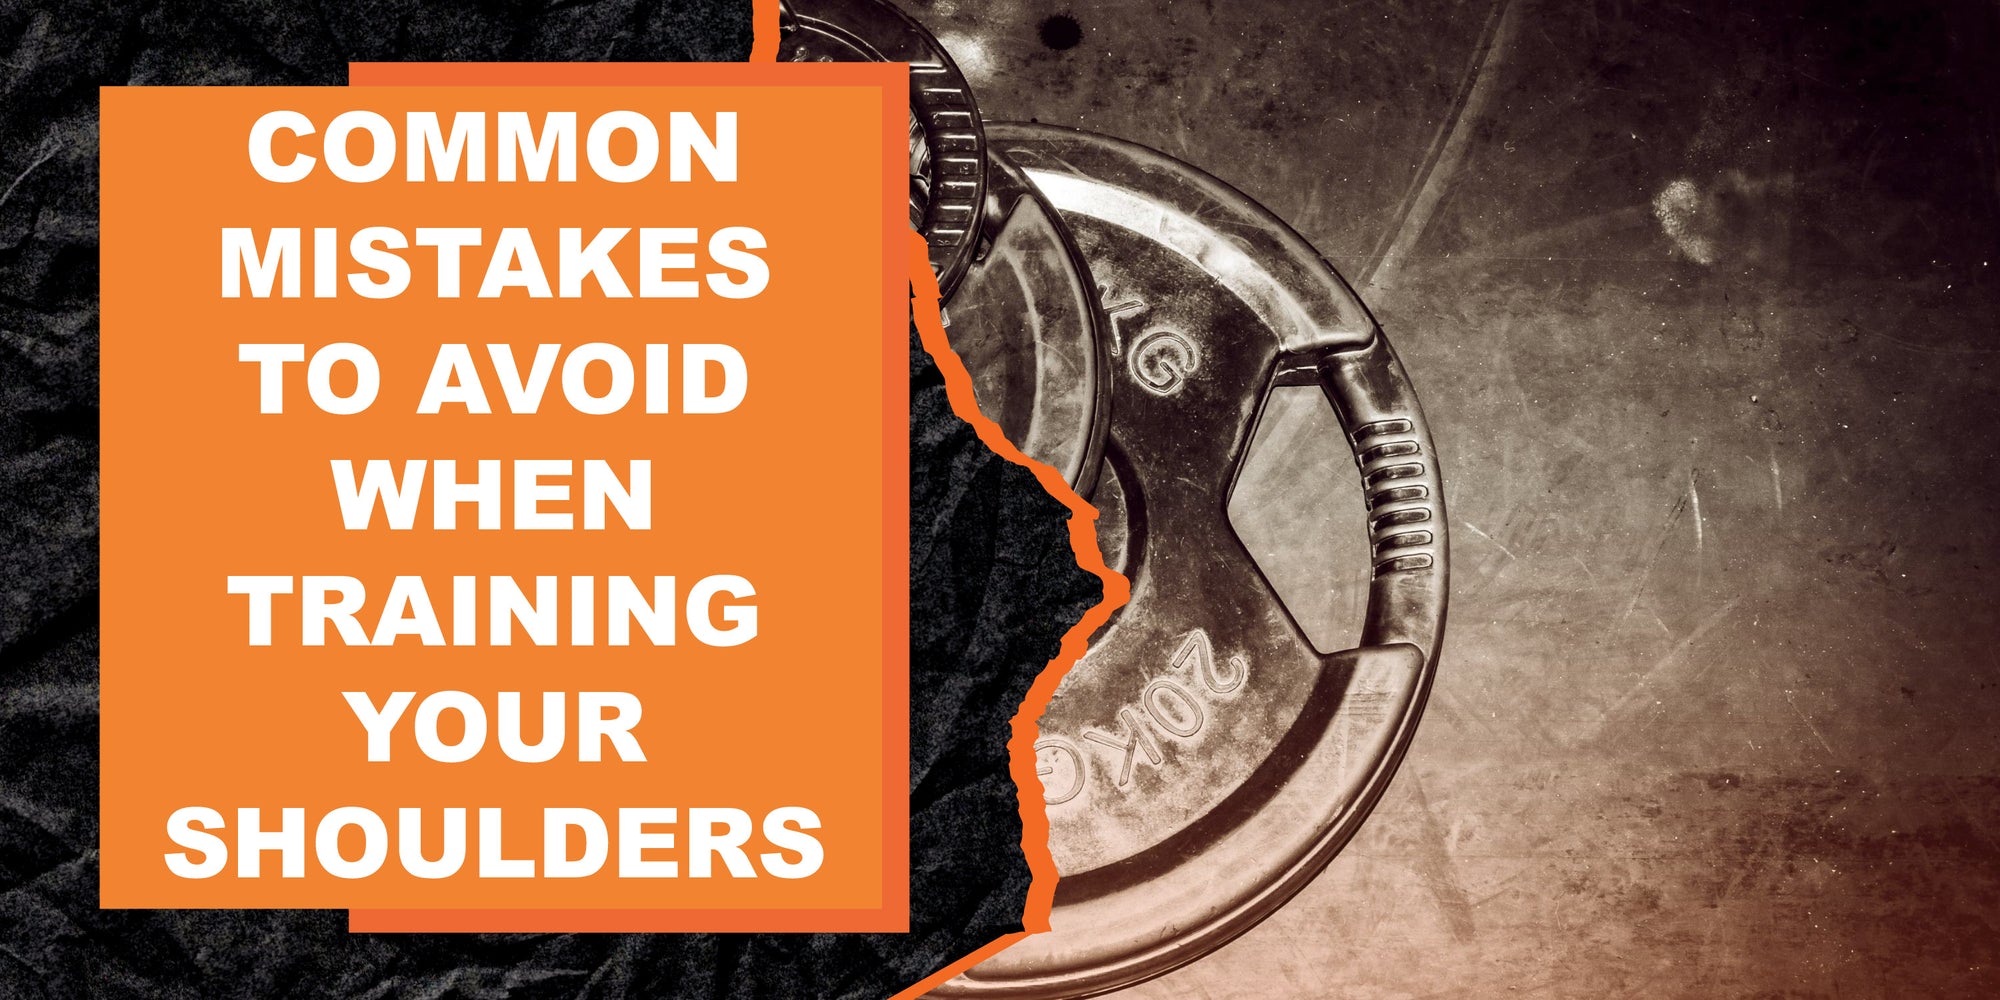 Common Mistakes to Avoid When Training Your Shoulders